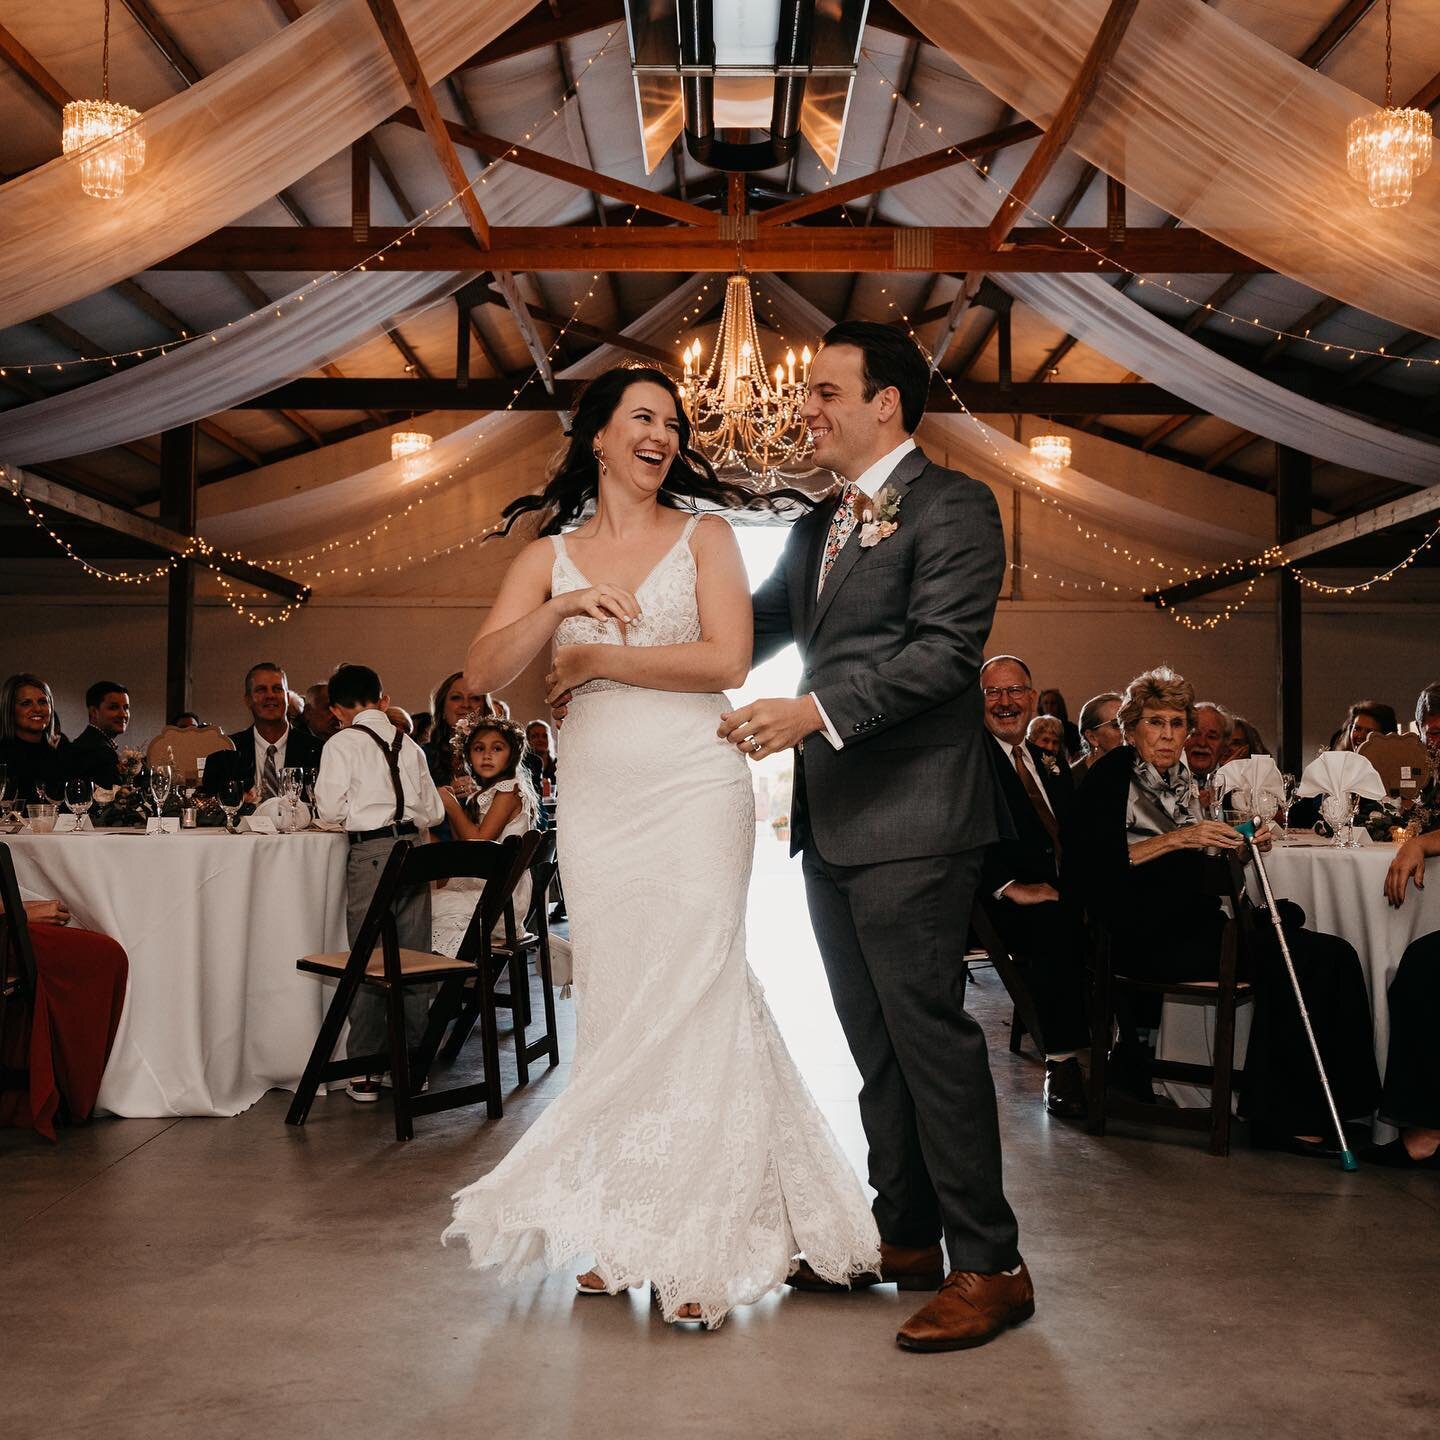 Hope you wore your dancing shoes, it&rsquo;s time to boogie. Raise your hand in the comments if you&rsquo;re ready to hit the dance floor! 

Book a tour with the link in bio!

Photography: @william_avery_photography 
Planner: @precious_times_events 
